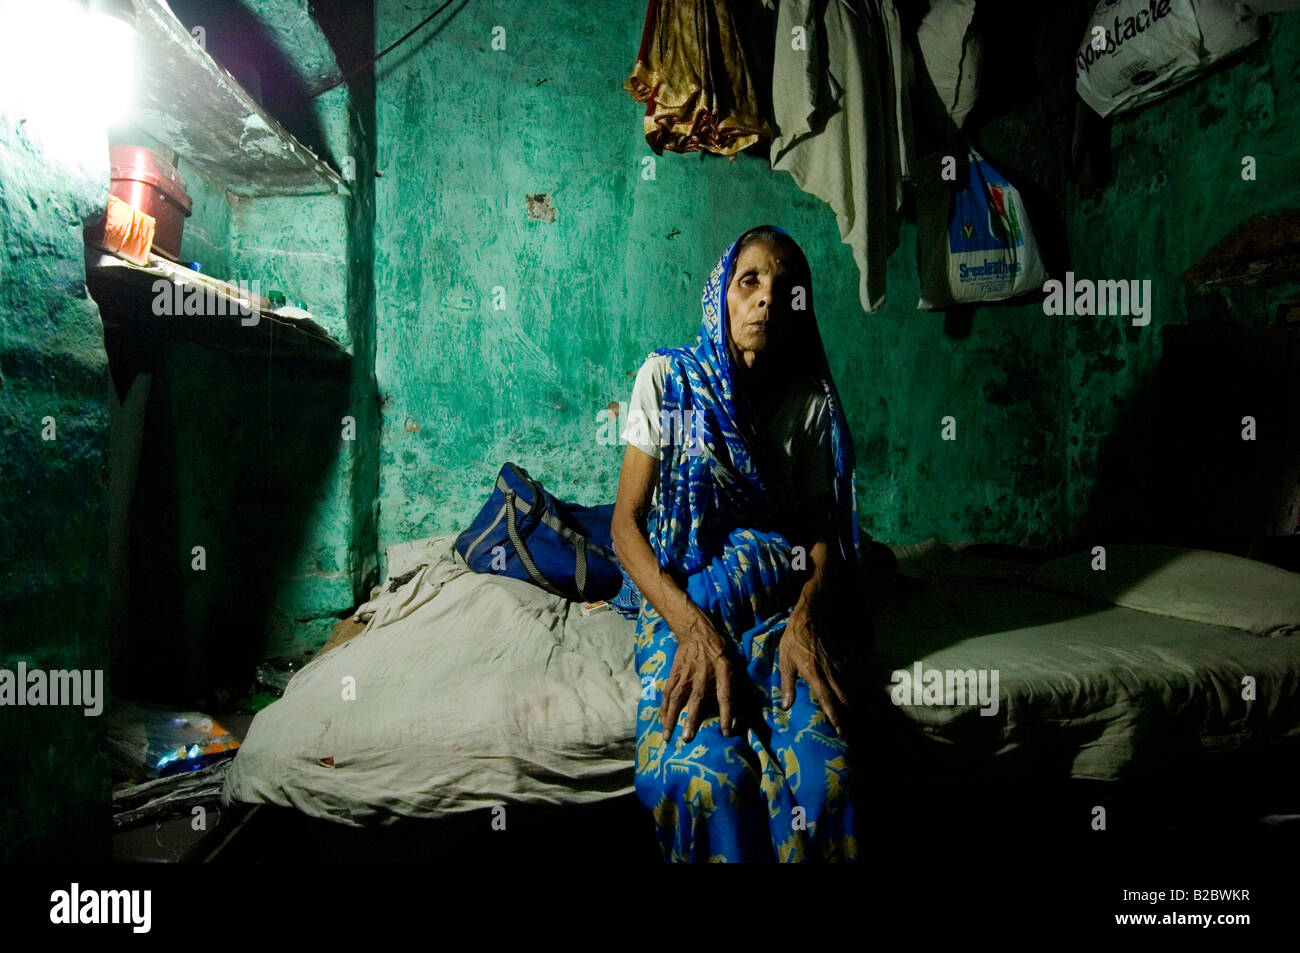 Shushila Devi, 70, has tuberculosis and lives in a small, dark room that resembles a cave. She is a widow and her daughter is m Stock Photo